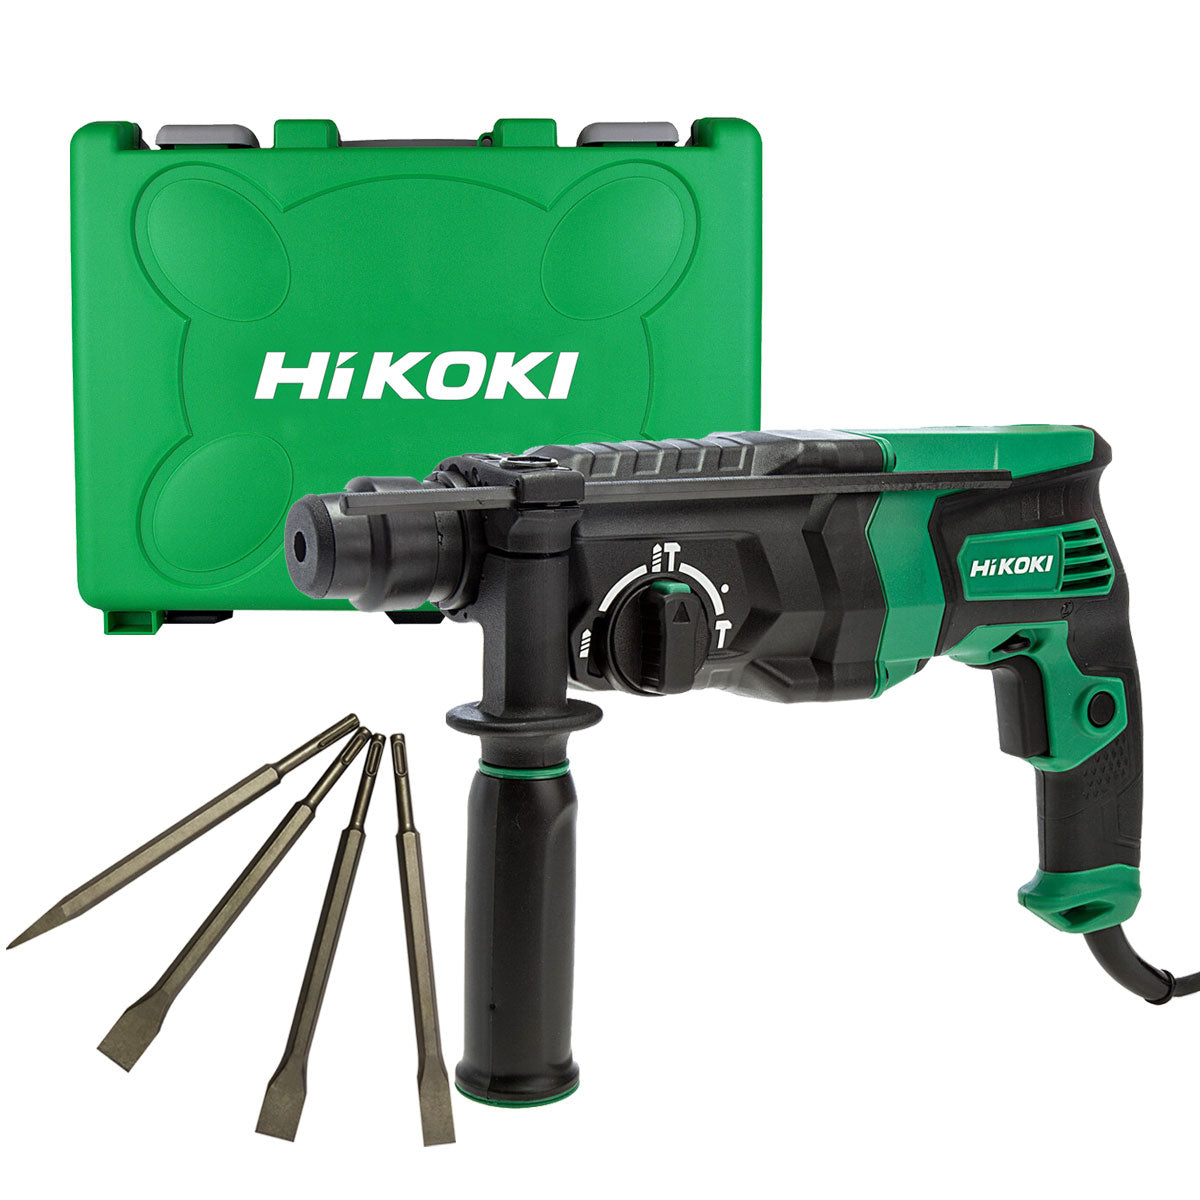 HiKOKI DH26PX2 830W SDS+ Rotary Hammer Drill 240V with 4 Piece Chisel Set